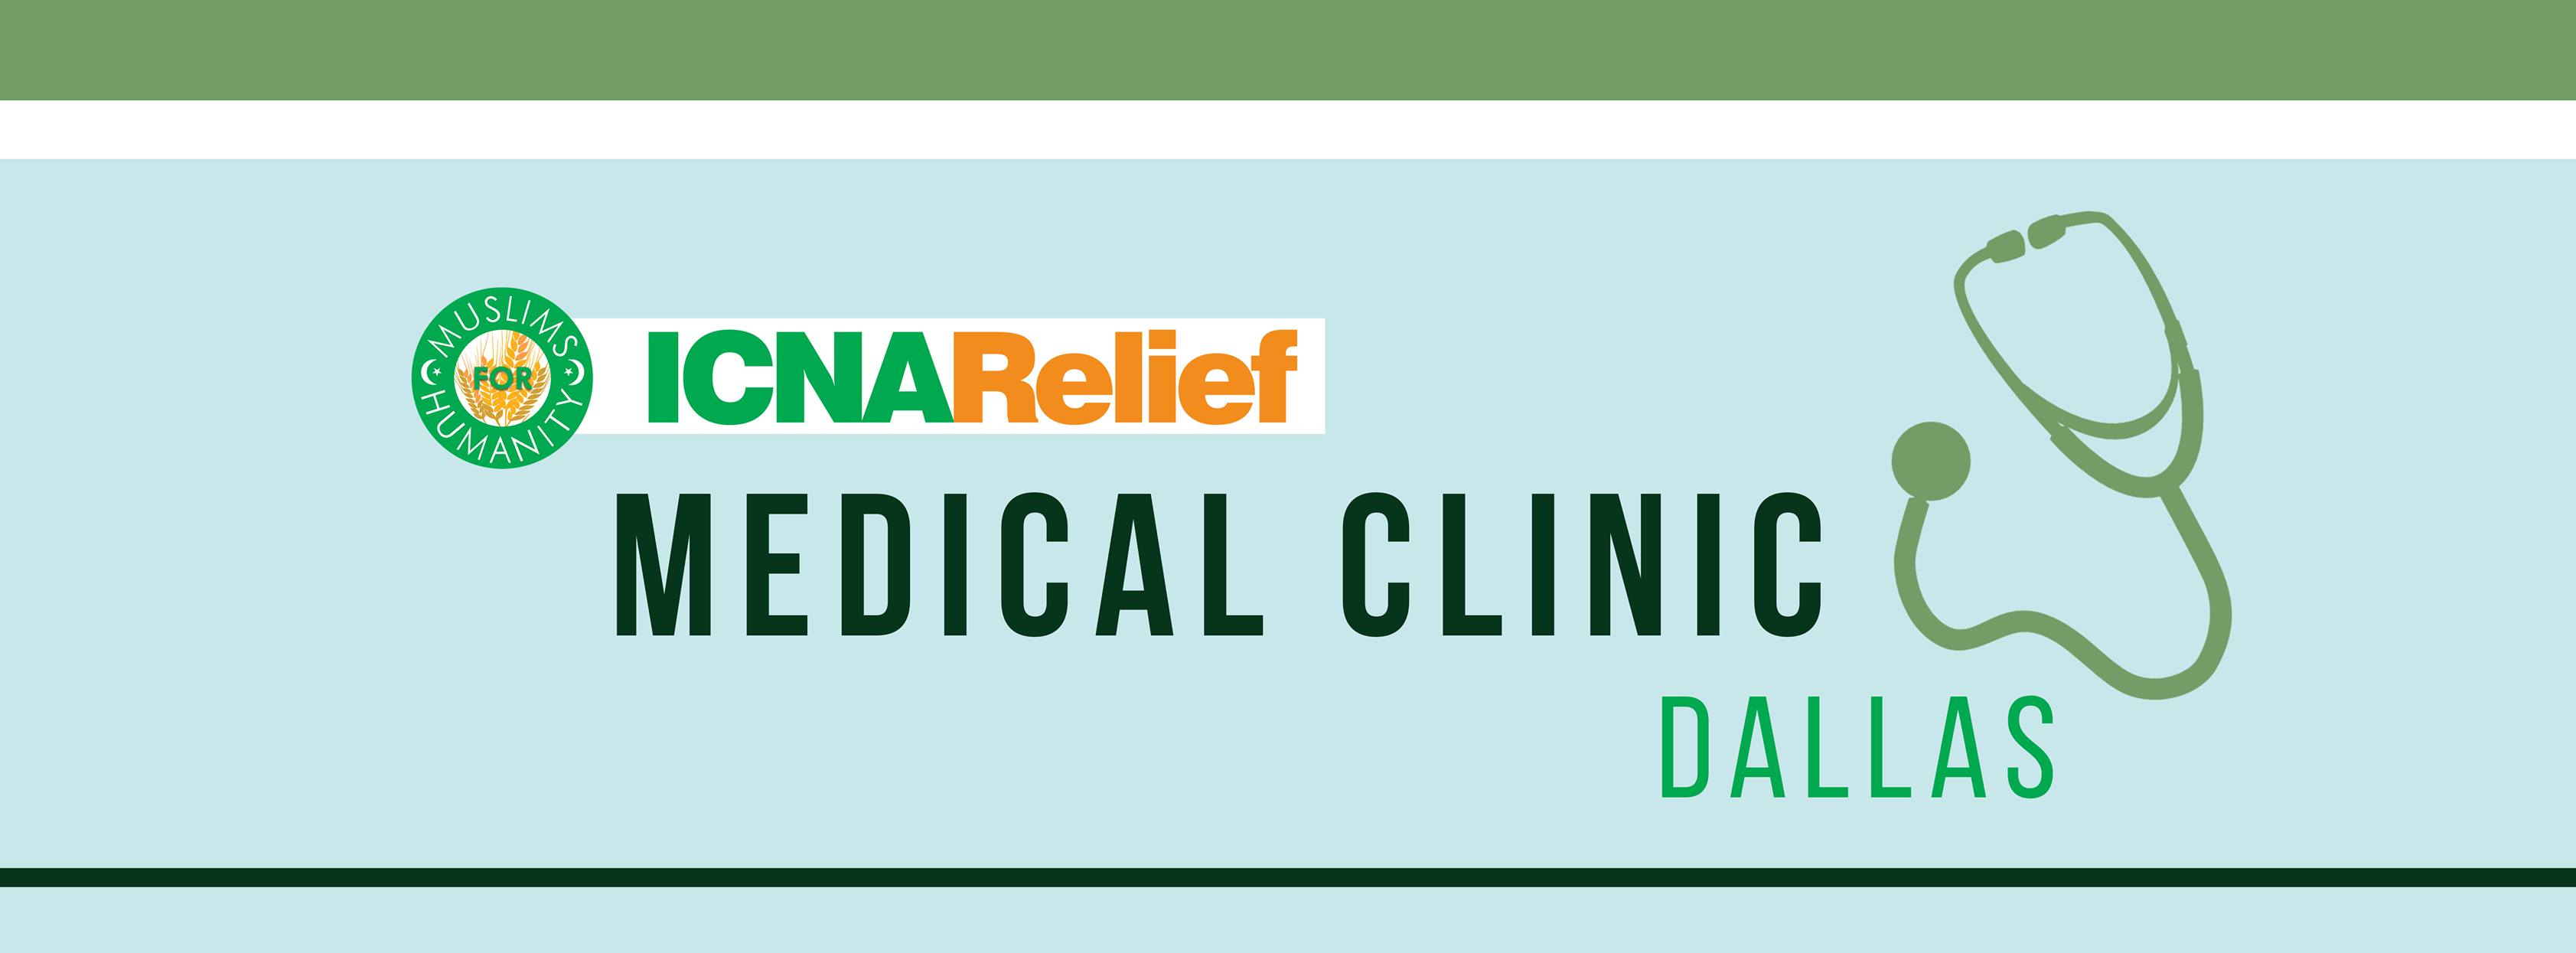 ICNA Relief Free Medical Clinic Dallas